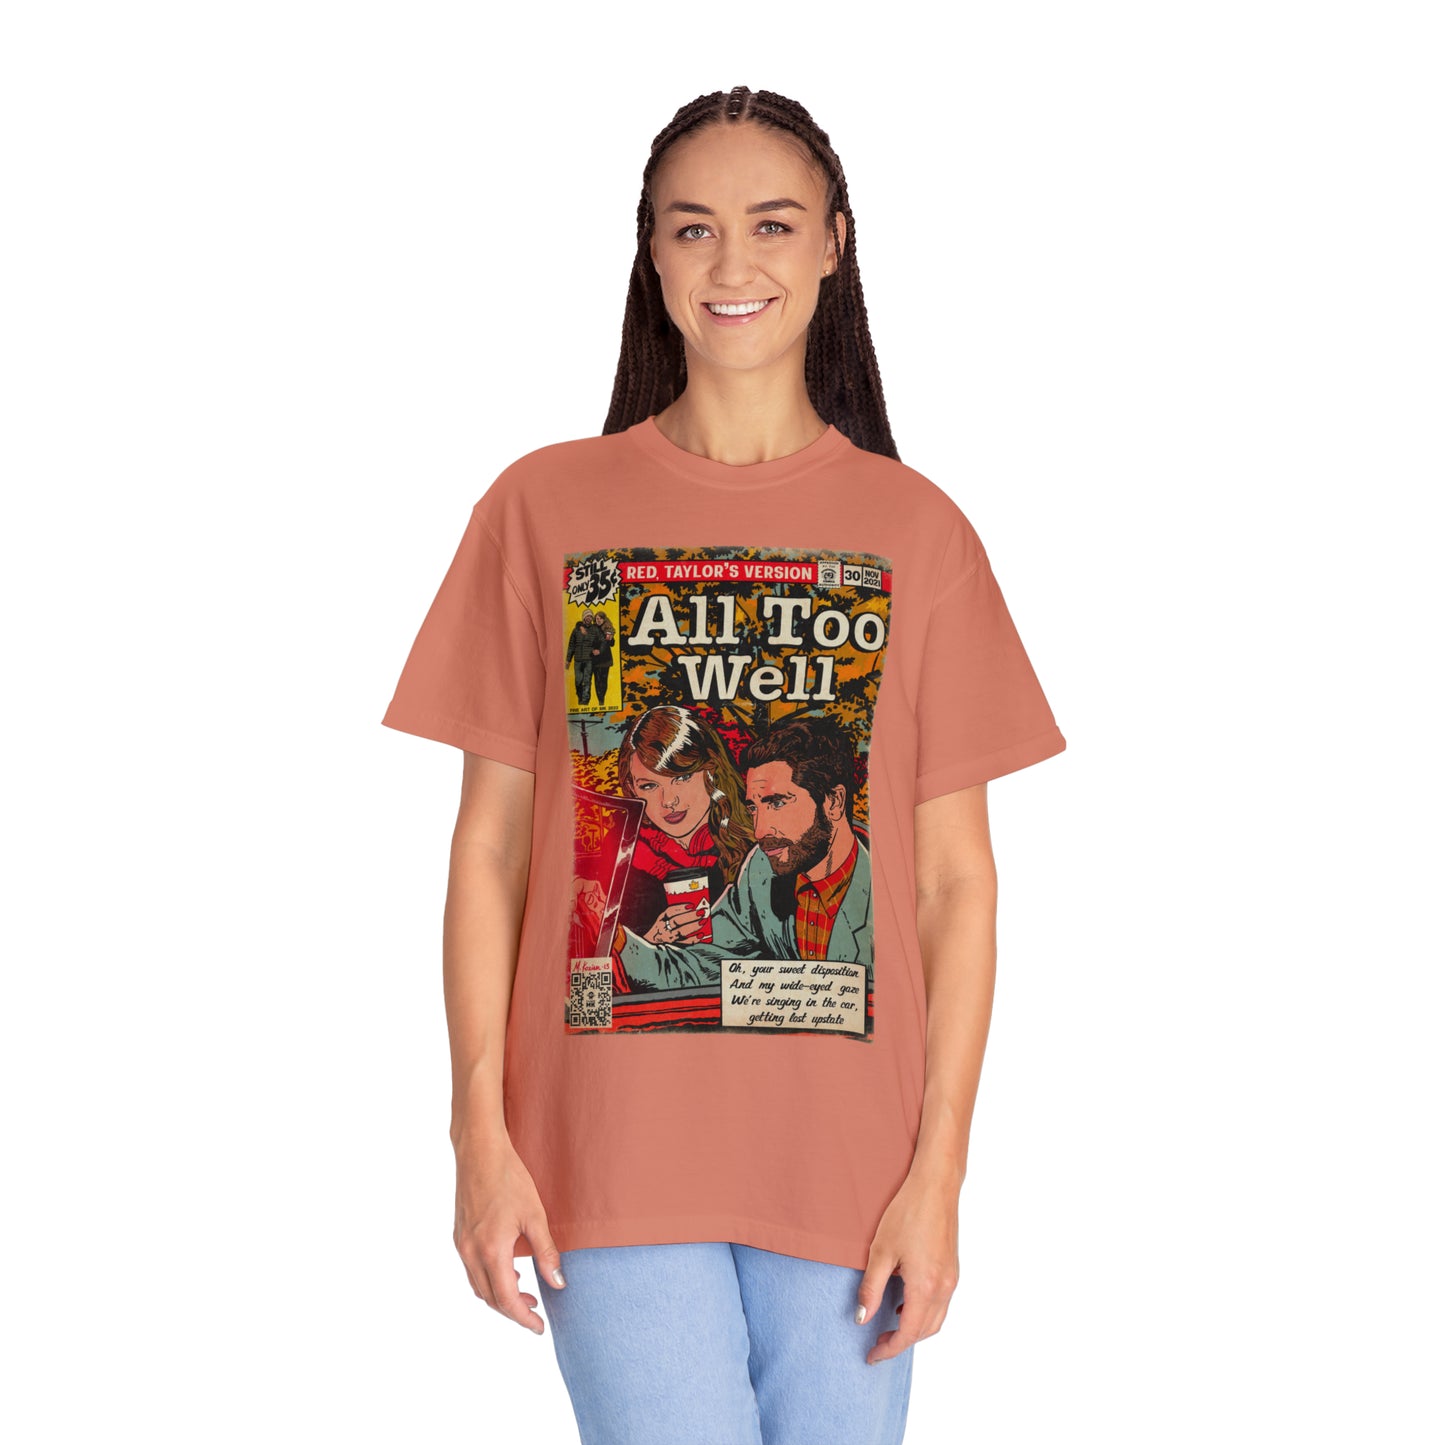 Taylor Swift - All Too Well - Unisex Comfort Colors T-shirt